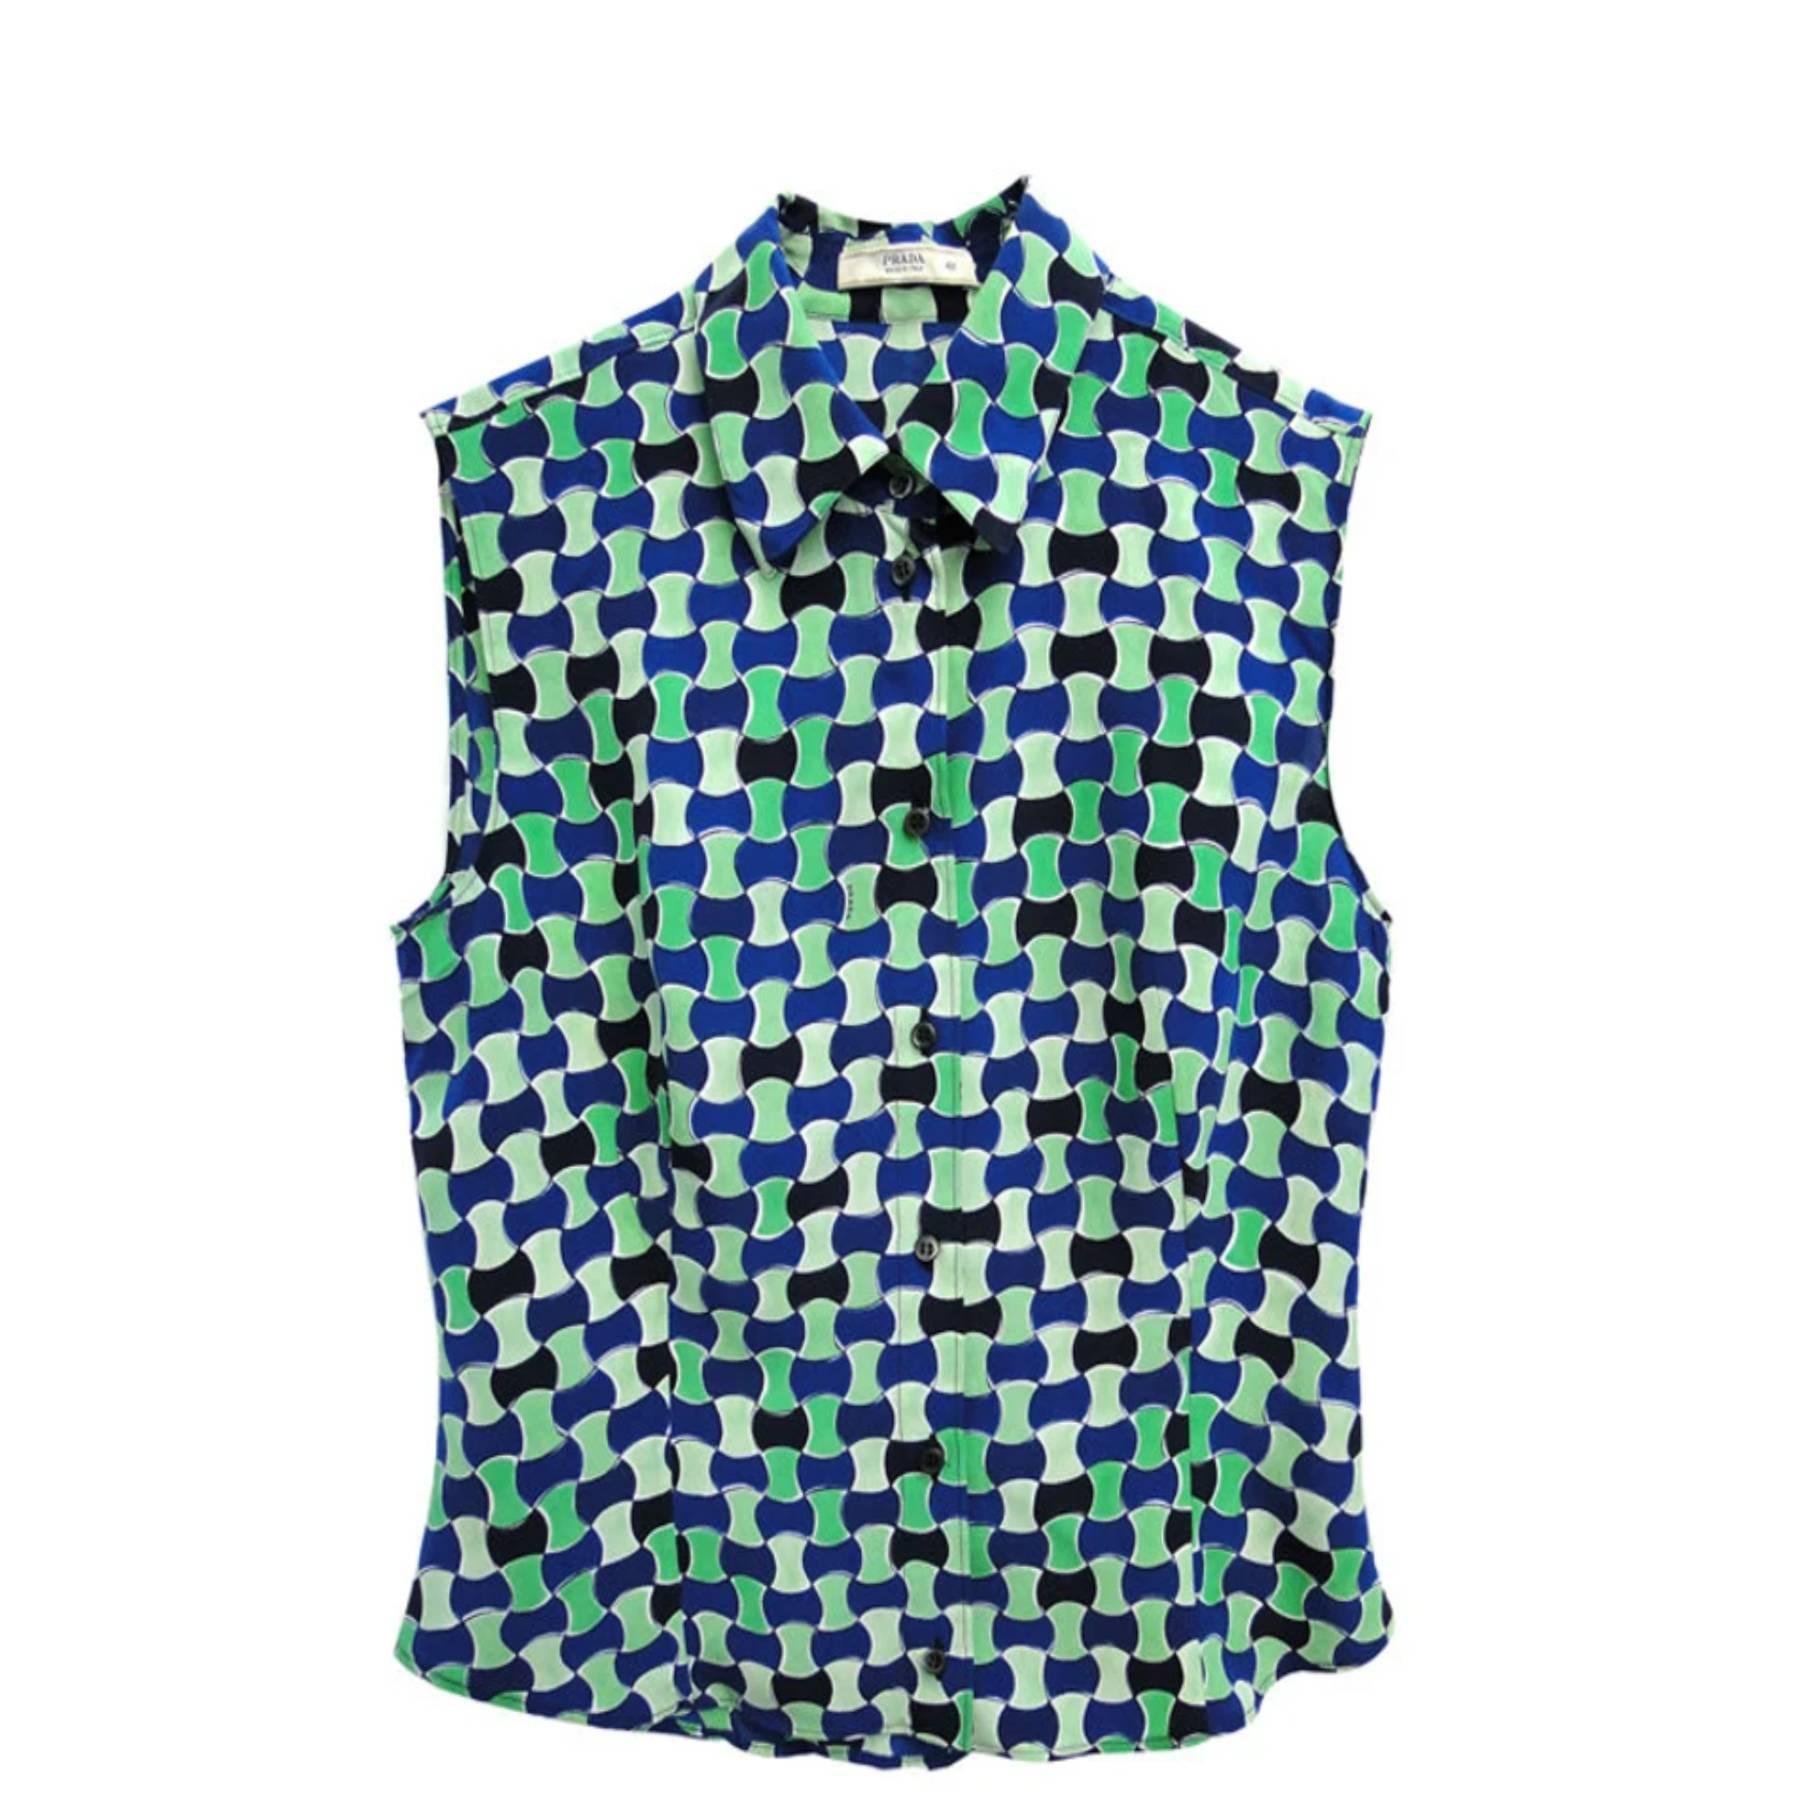 Prada geometric print silk sleeveless shirt
blue, green and white print
frontal button closure
Late 90s in excellent condition
Size: medium 42 (IT) - 4/6 (US) - 10 (UK)
Made in Italy